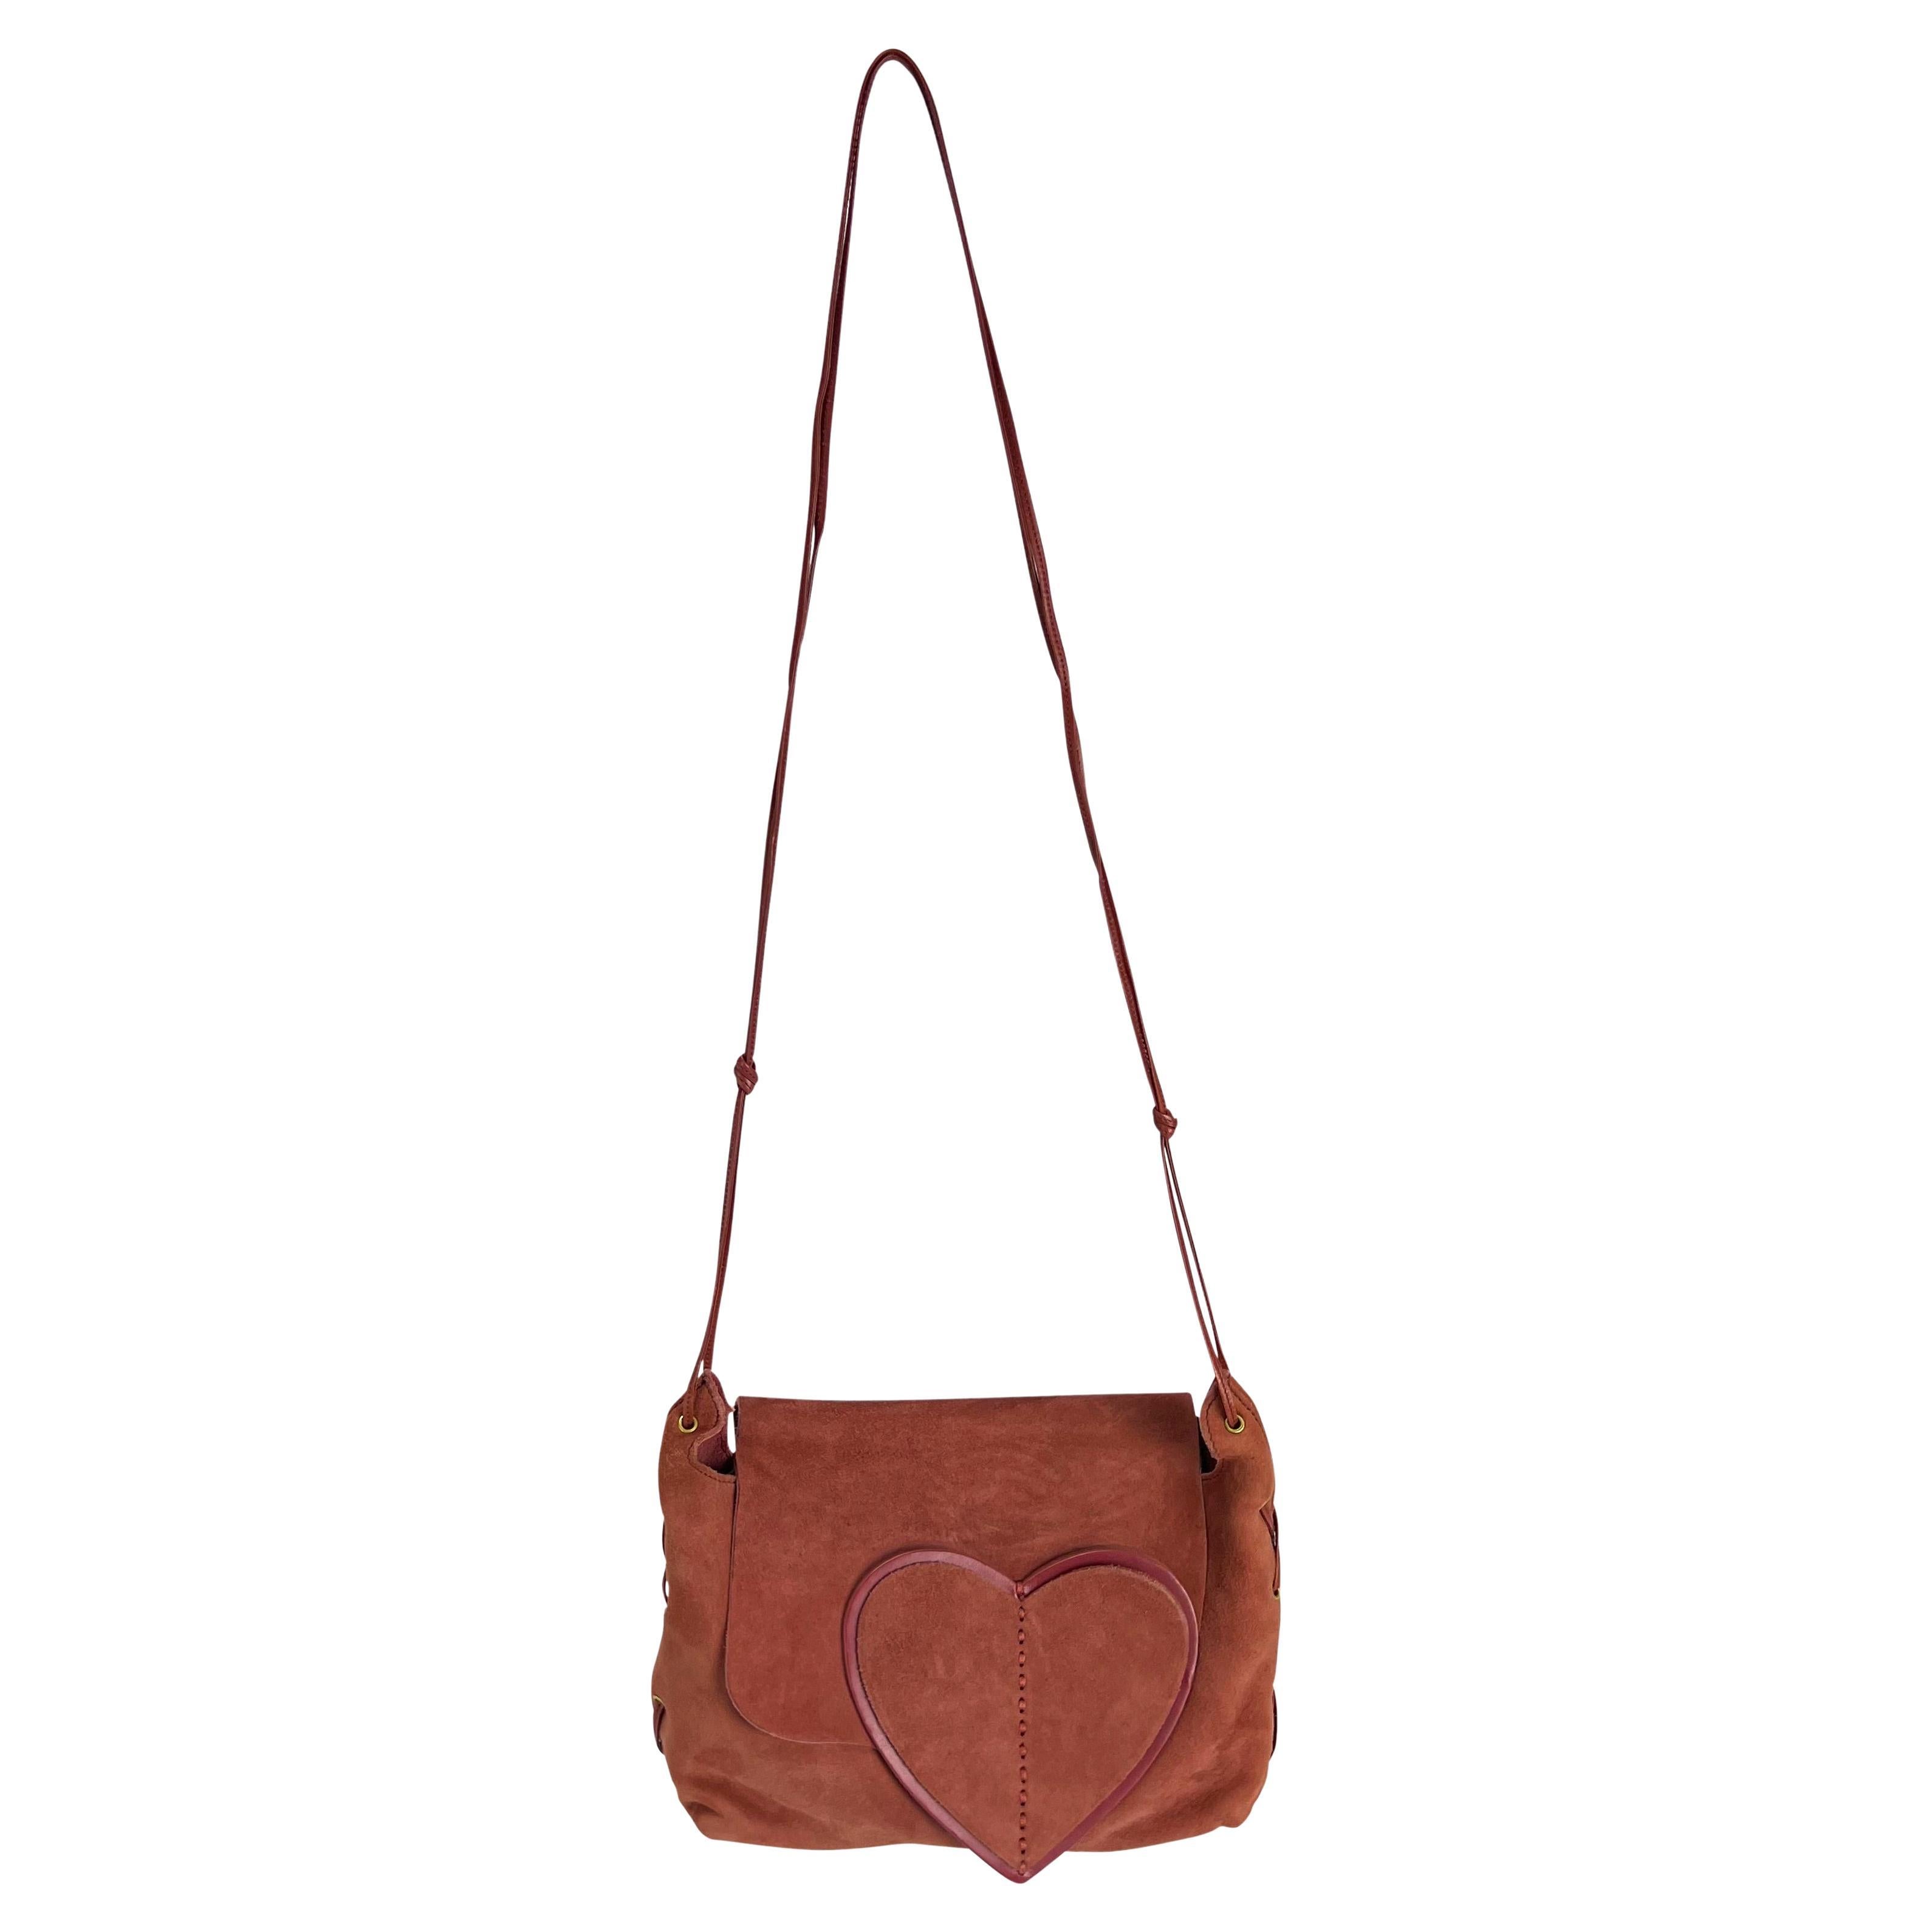 S/S 2002 Gucci by Tom Ford Runway Blush Suede Heart Crossbody Bag 